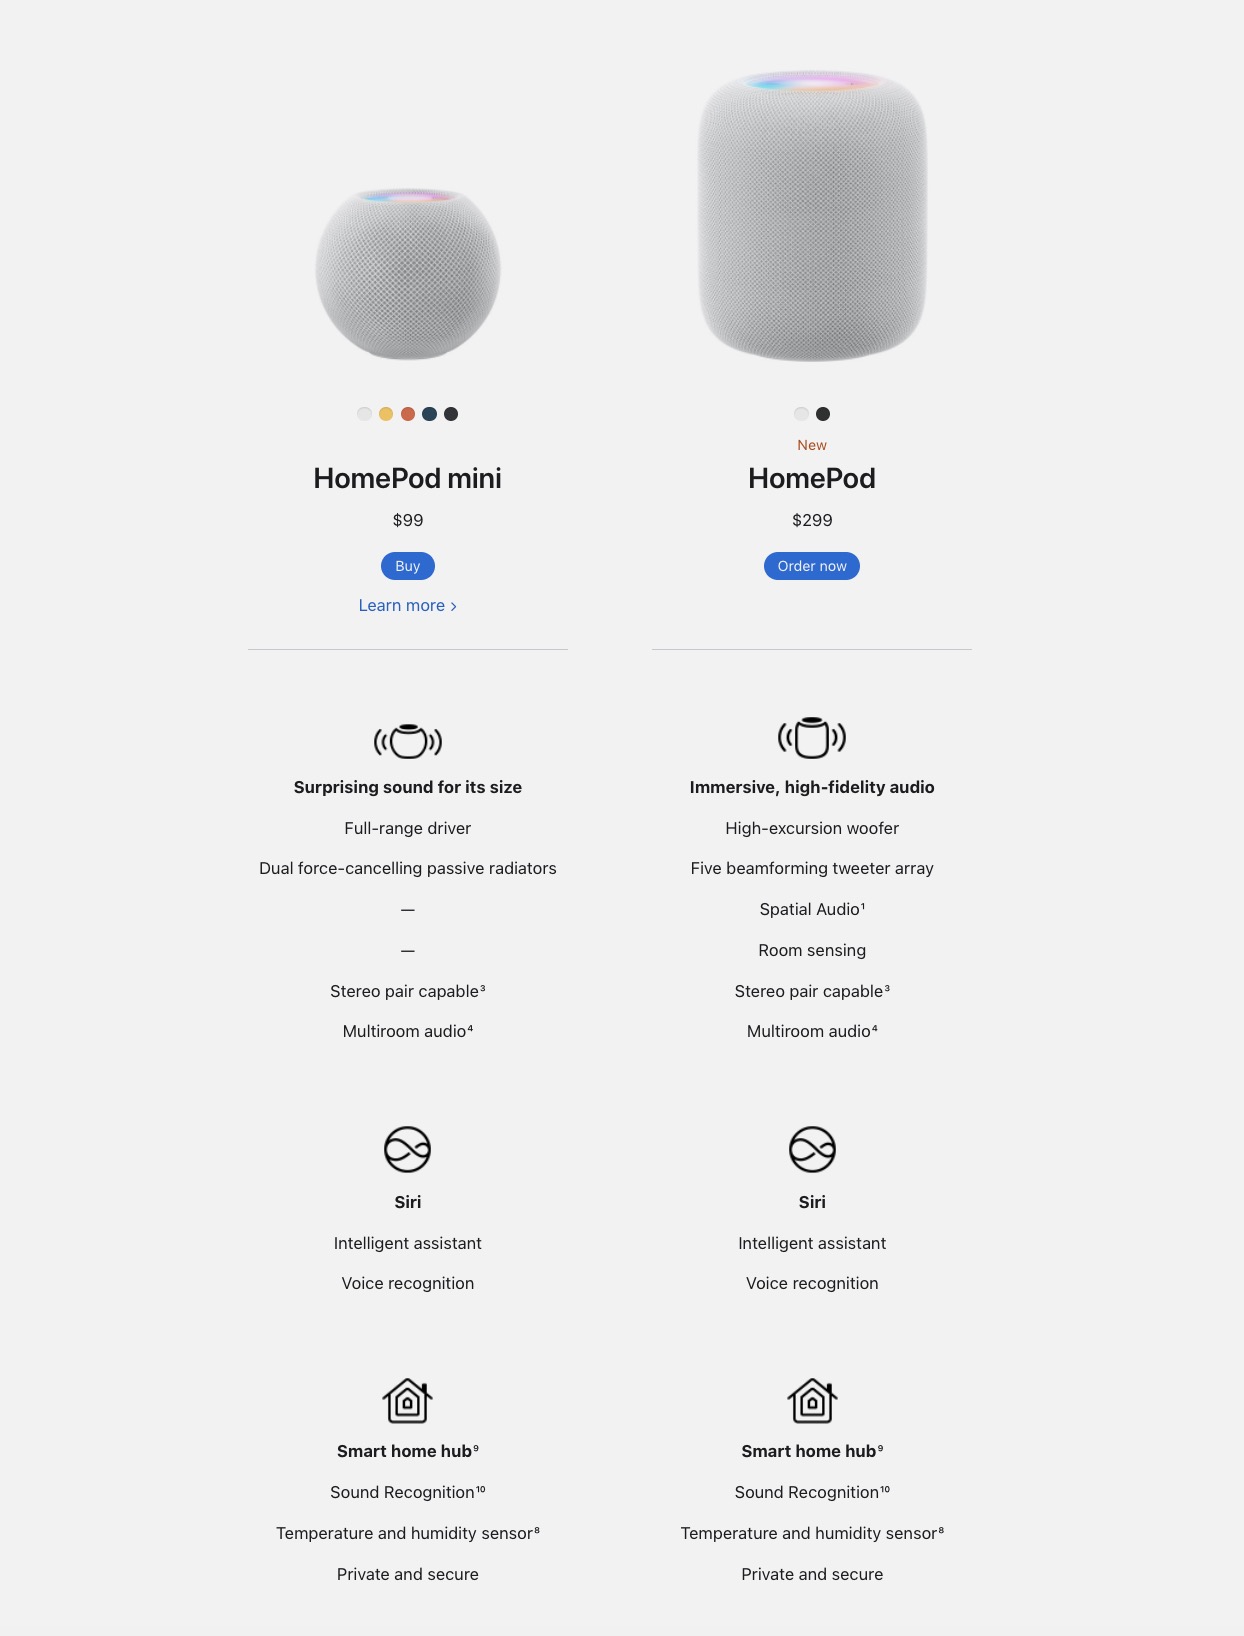 New HomePod and Existing HomePod Mini Have Temperature and Humidity Sensor